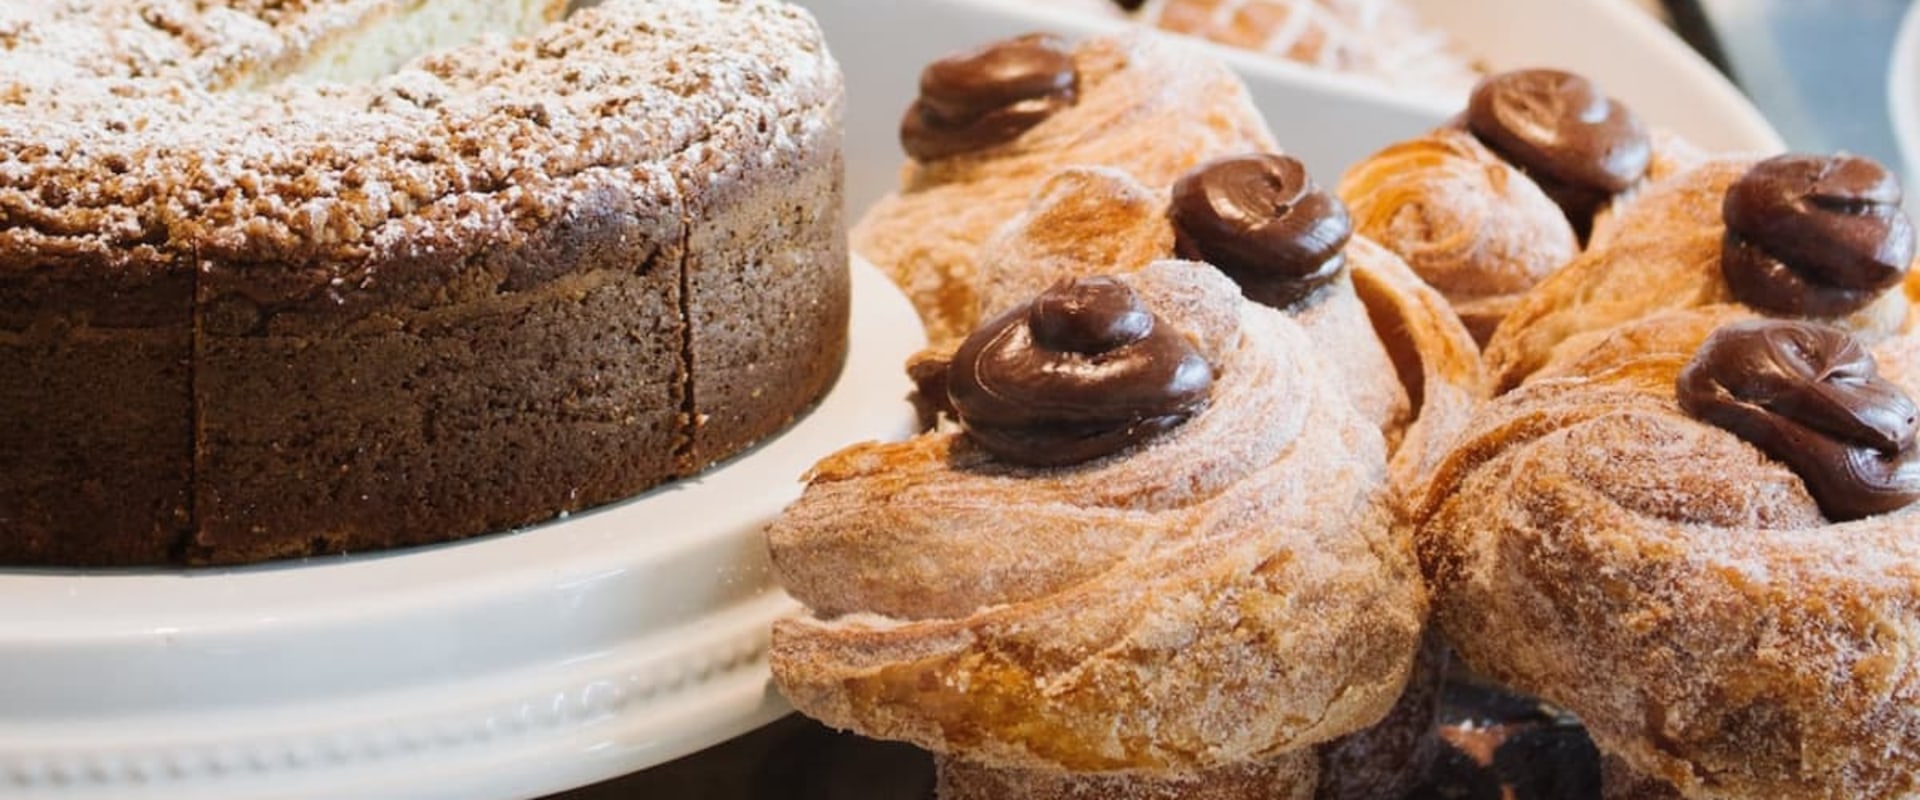 The Sweetest Treats: Exploring the Most Popular Items at Bakeshops in Los Angeles County, CA